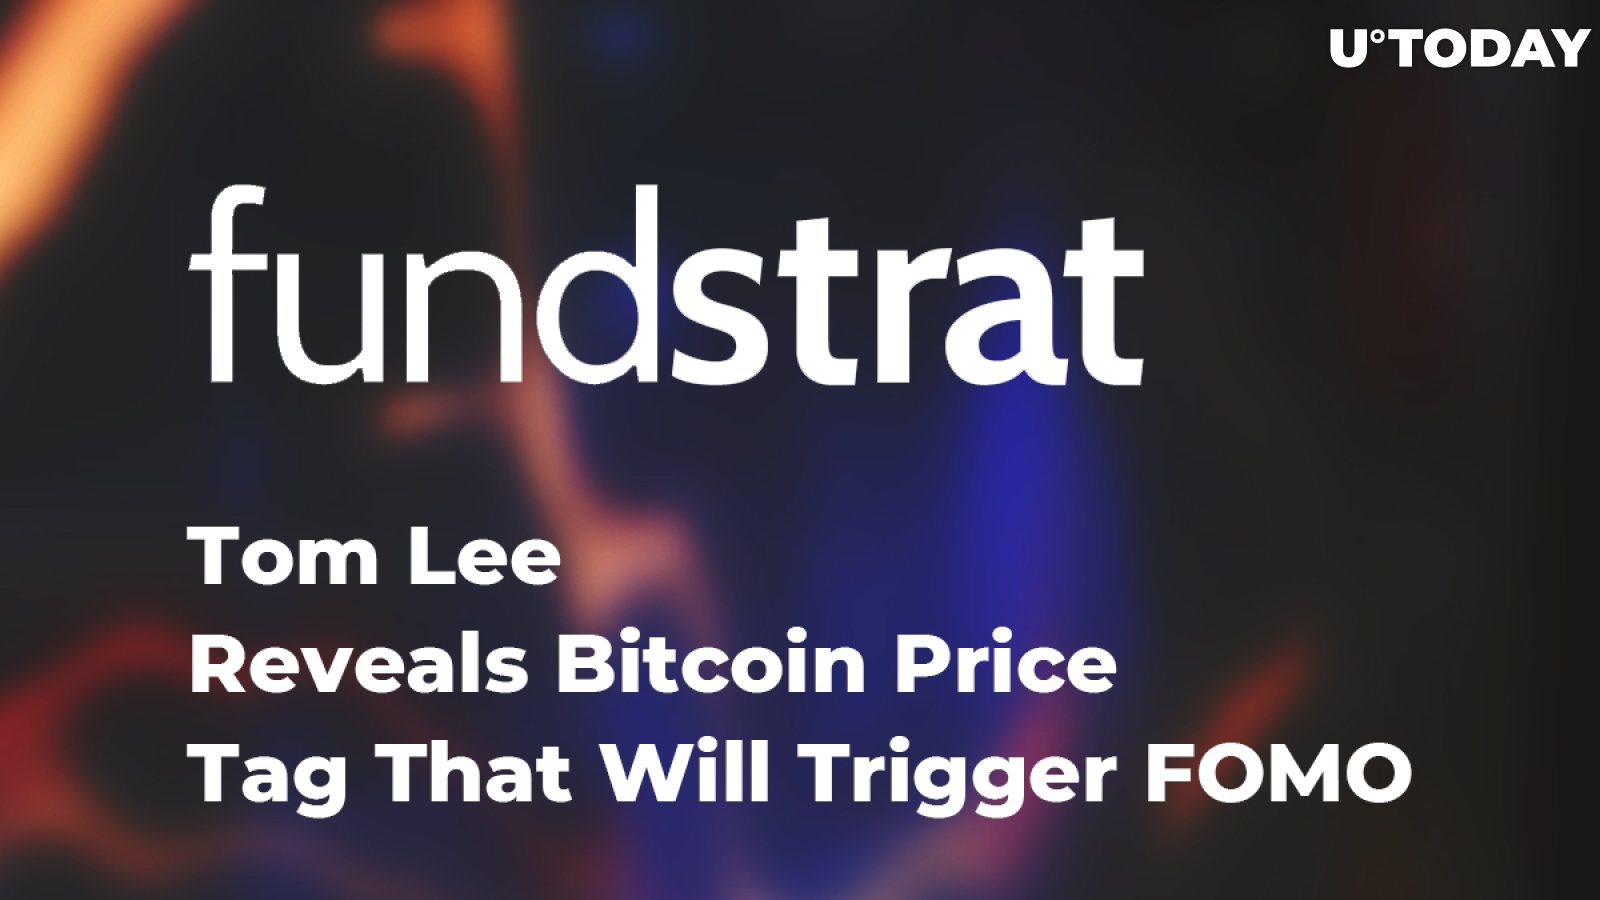 Fundstrat’s Tom Lee Reveals Bitcoin Price Tag That Will Trigger FOMO